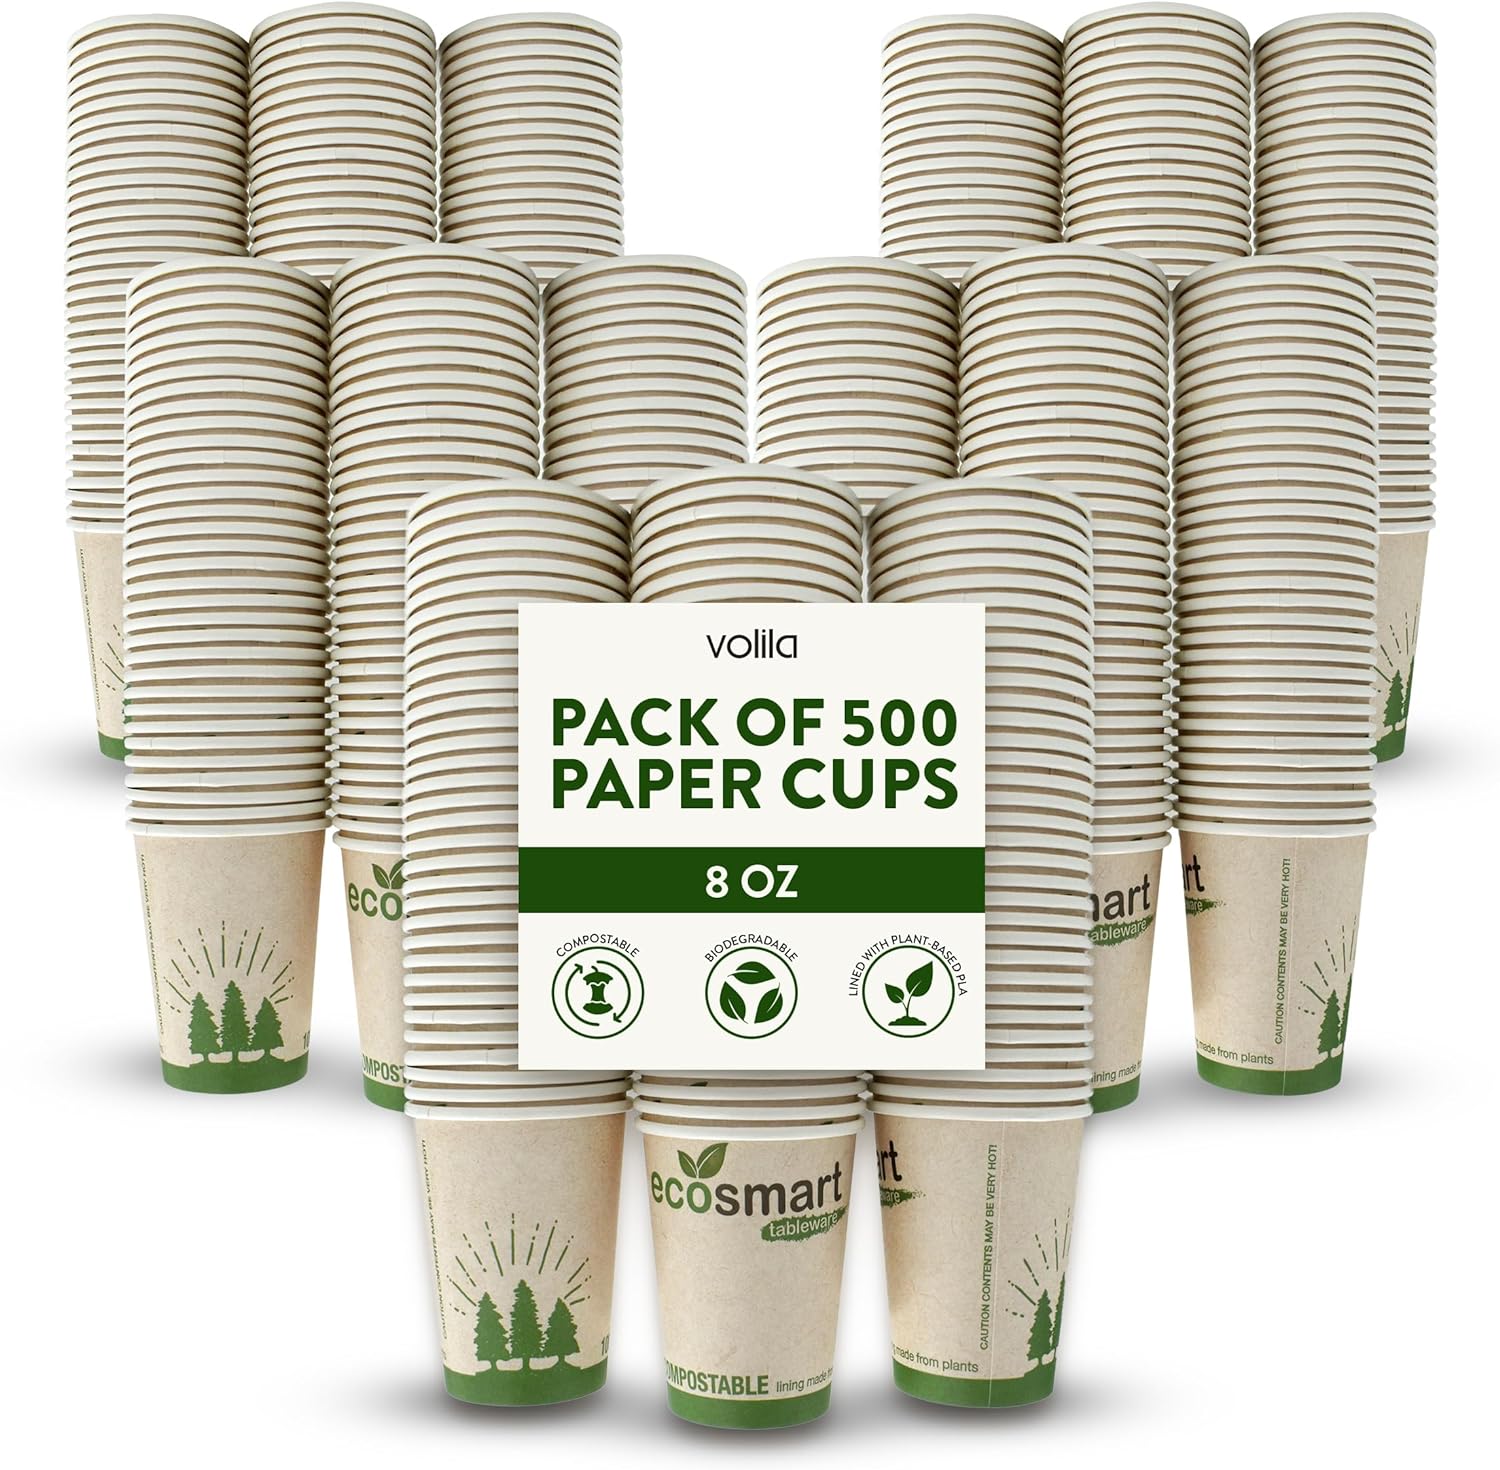 Biodegradable Insulated Coffee Cups, 8oz (100pk)